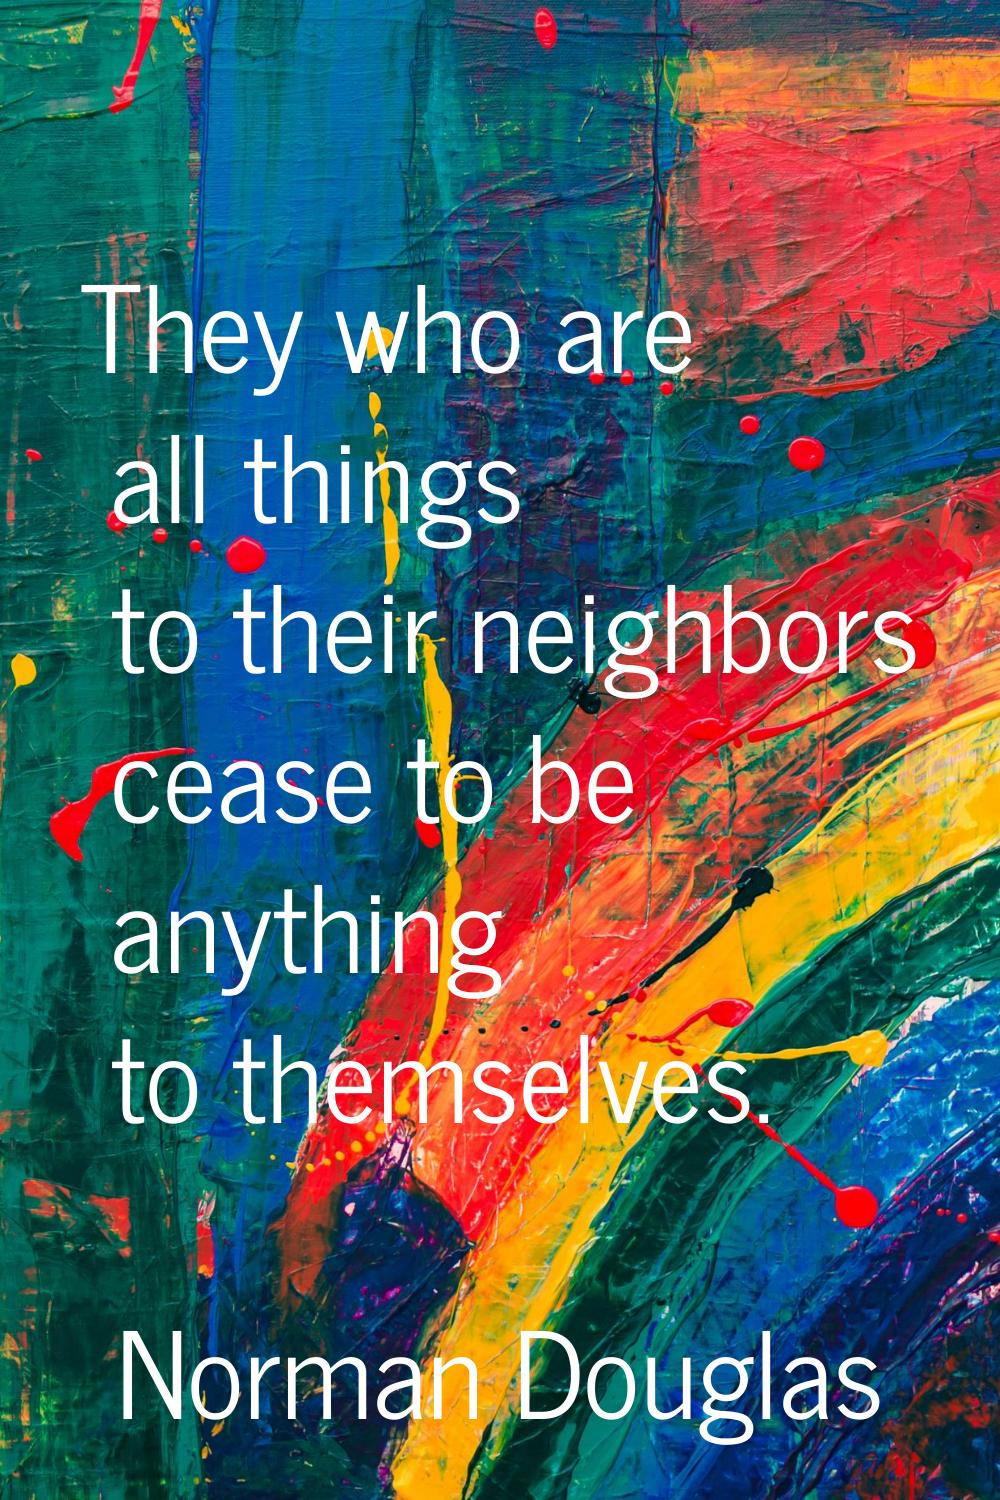 They who are all things to their neighbors cease to be anything to themselves.